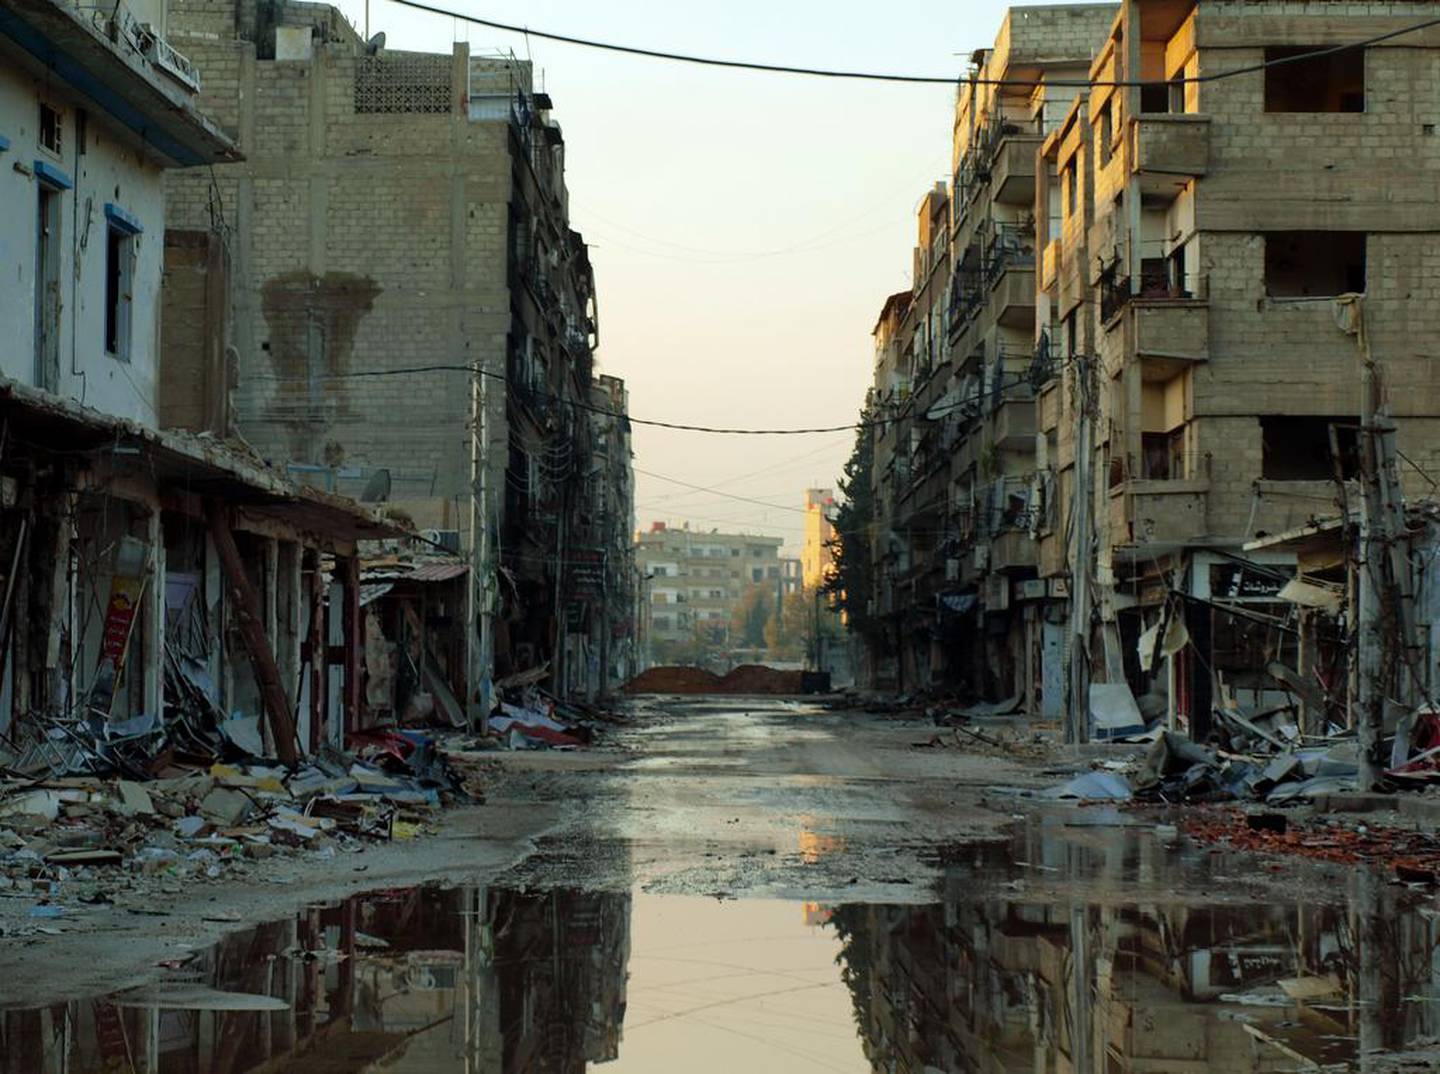 The ruined Damascus suburb of Daraya on December 27, 2012. Shaam News Network / AFP